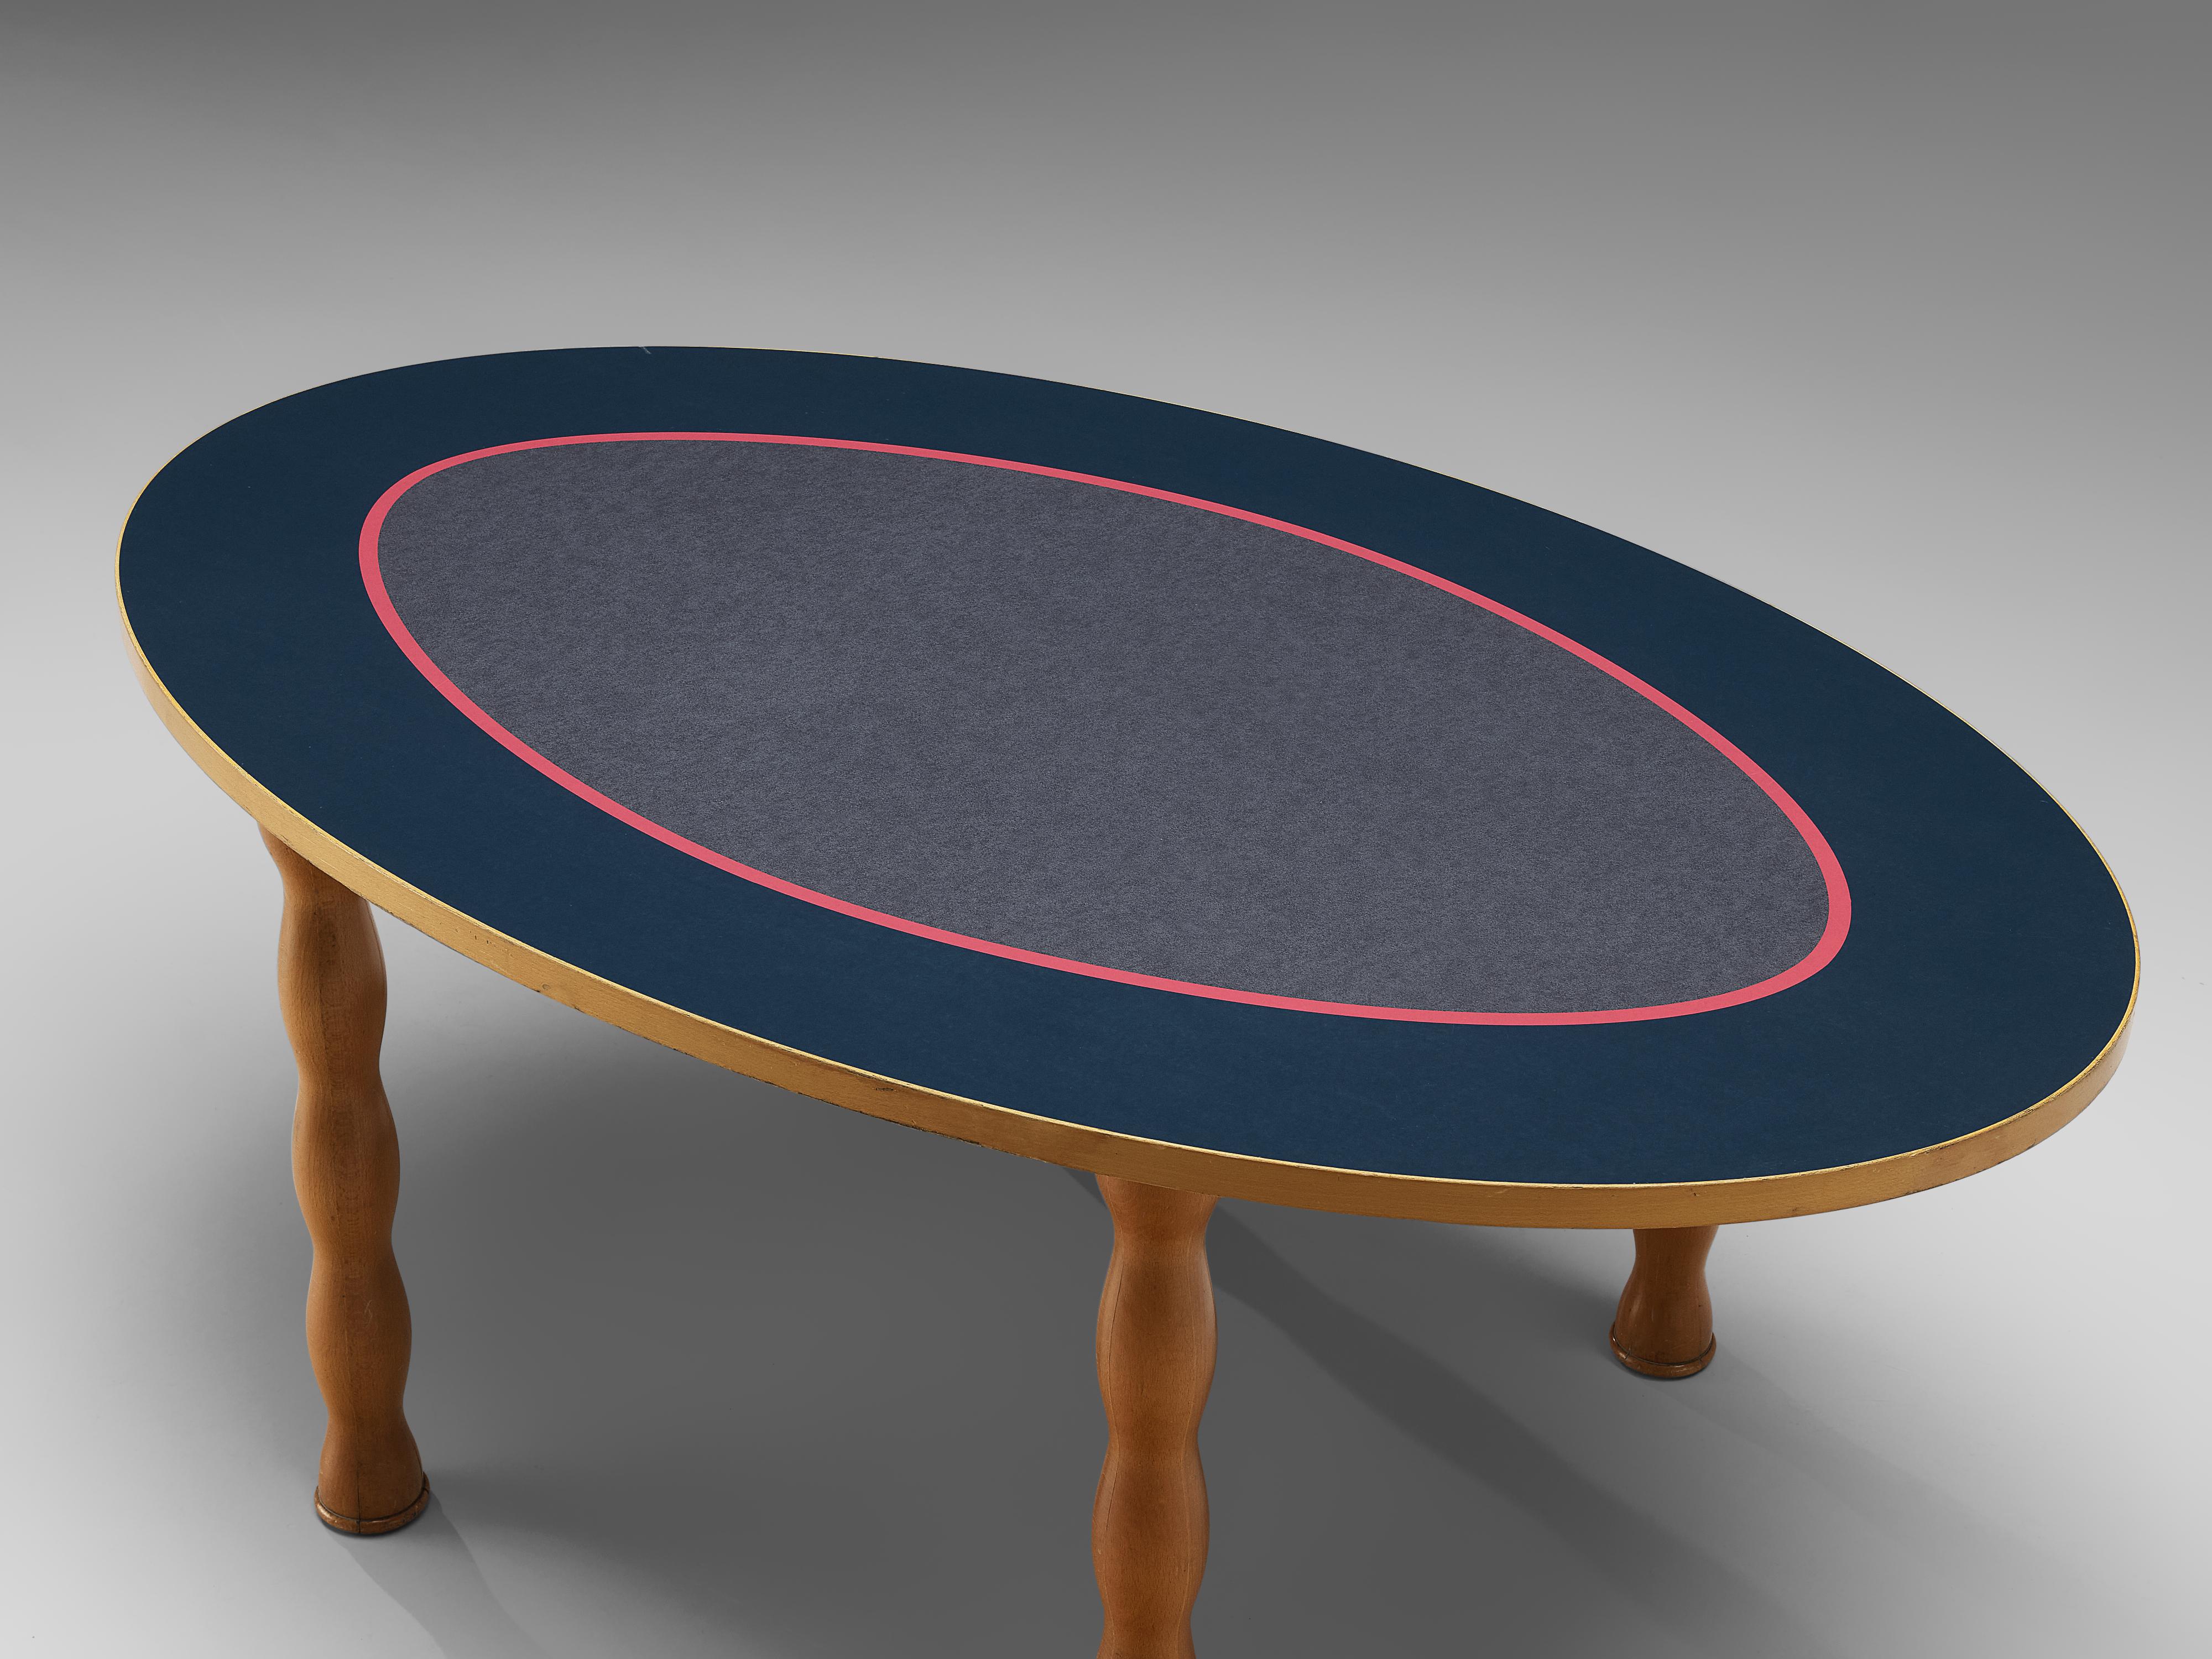 Late 20th Century Rare Ettore Sottsass ‘Filicudi’ Dining Table with Oval Resin Top